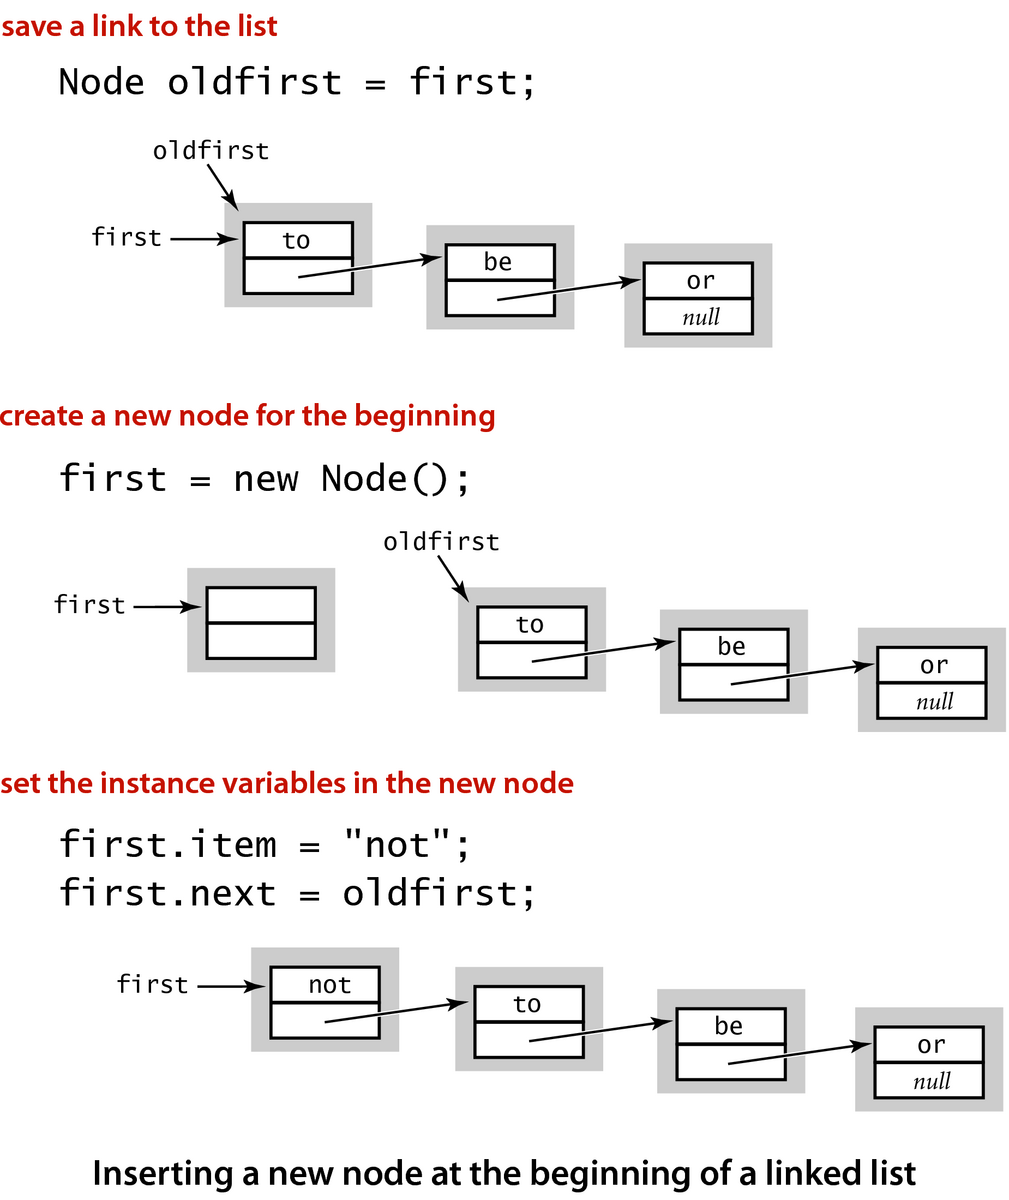 Inserting a new node at the beginning of a linked list (p.144)